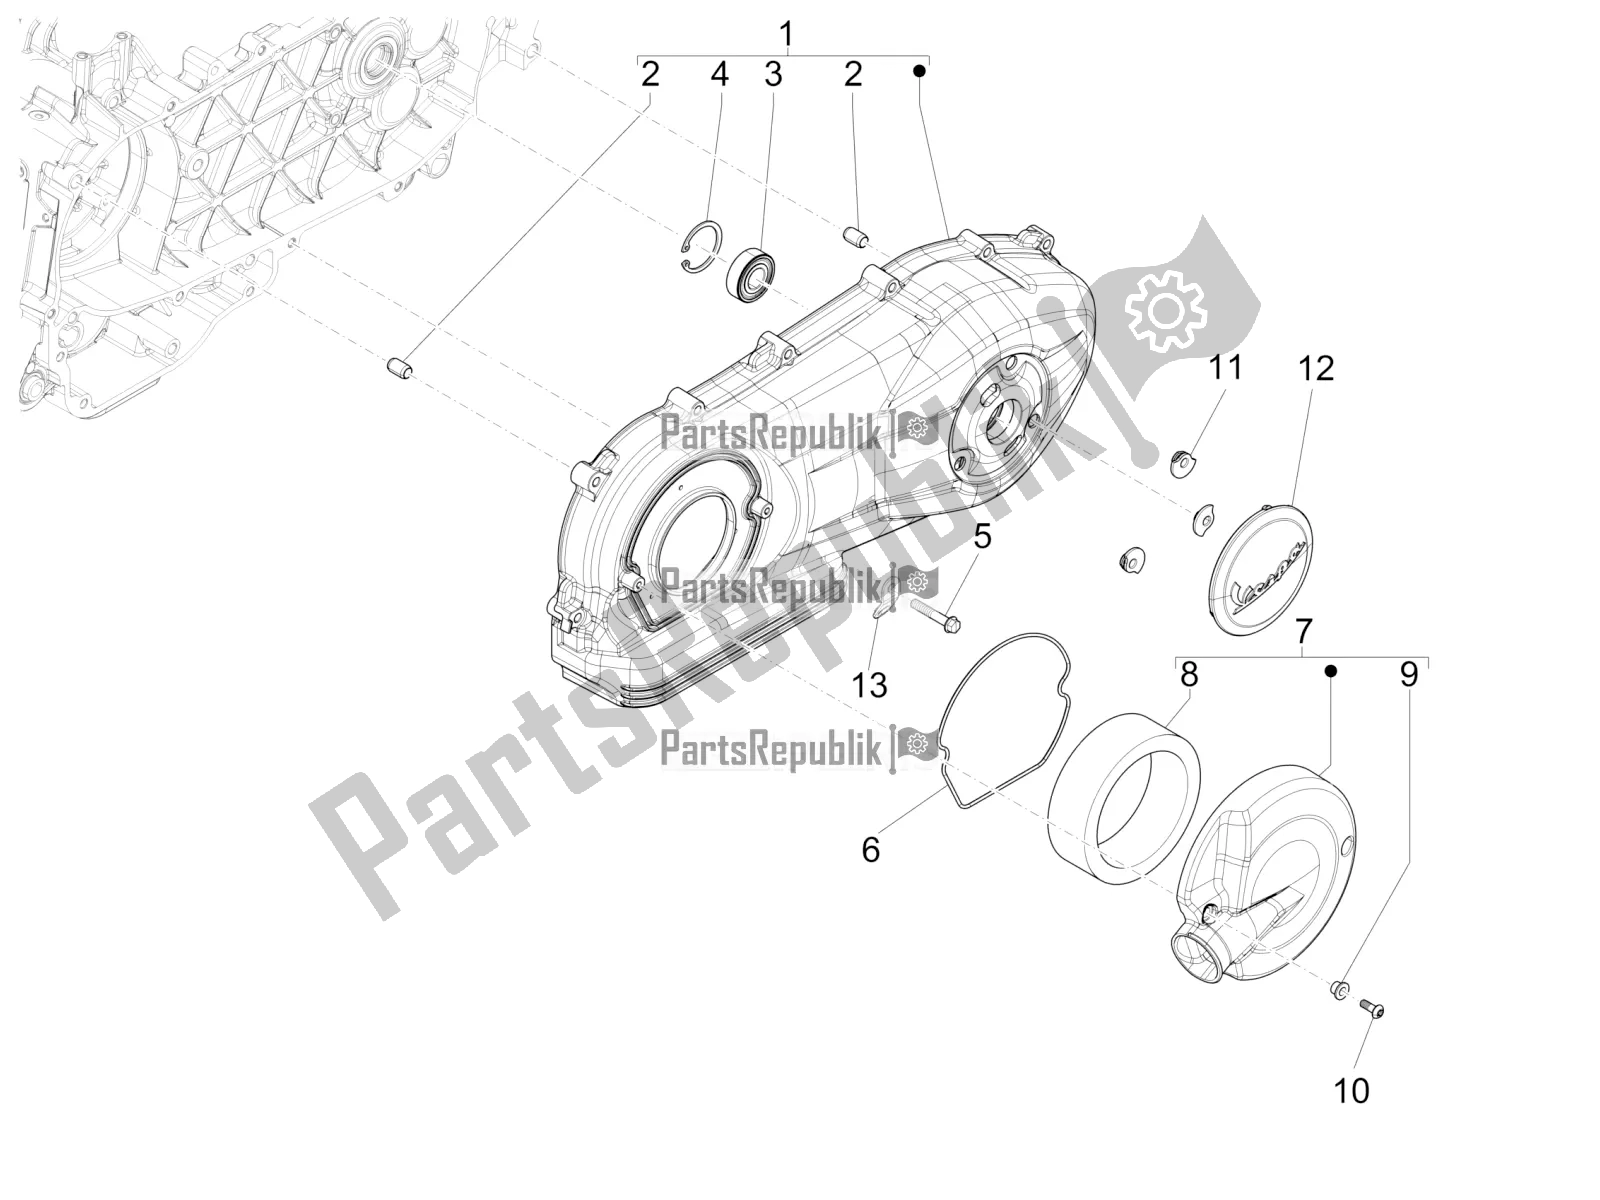 All parts for the Crankcase Cover - Crankcase Cooling of the Vespa 946 150 ABS CD Apac 2022